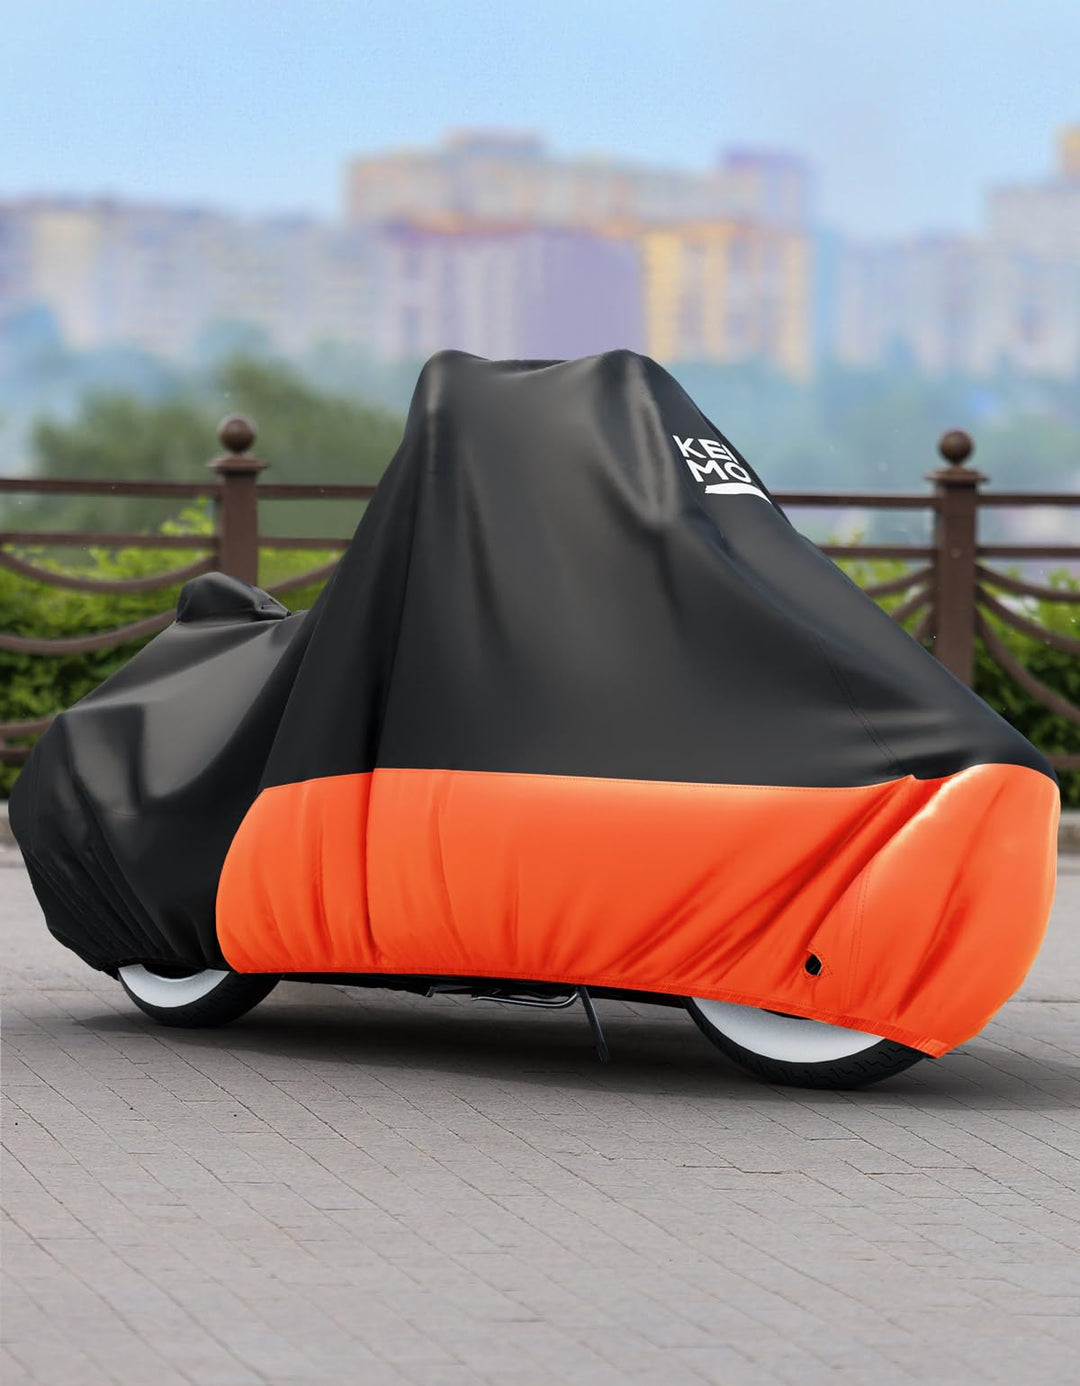 Motorcycle Cover for Touring Models - Kemimoto